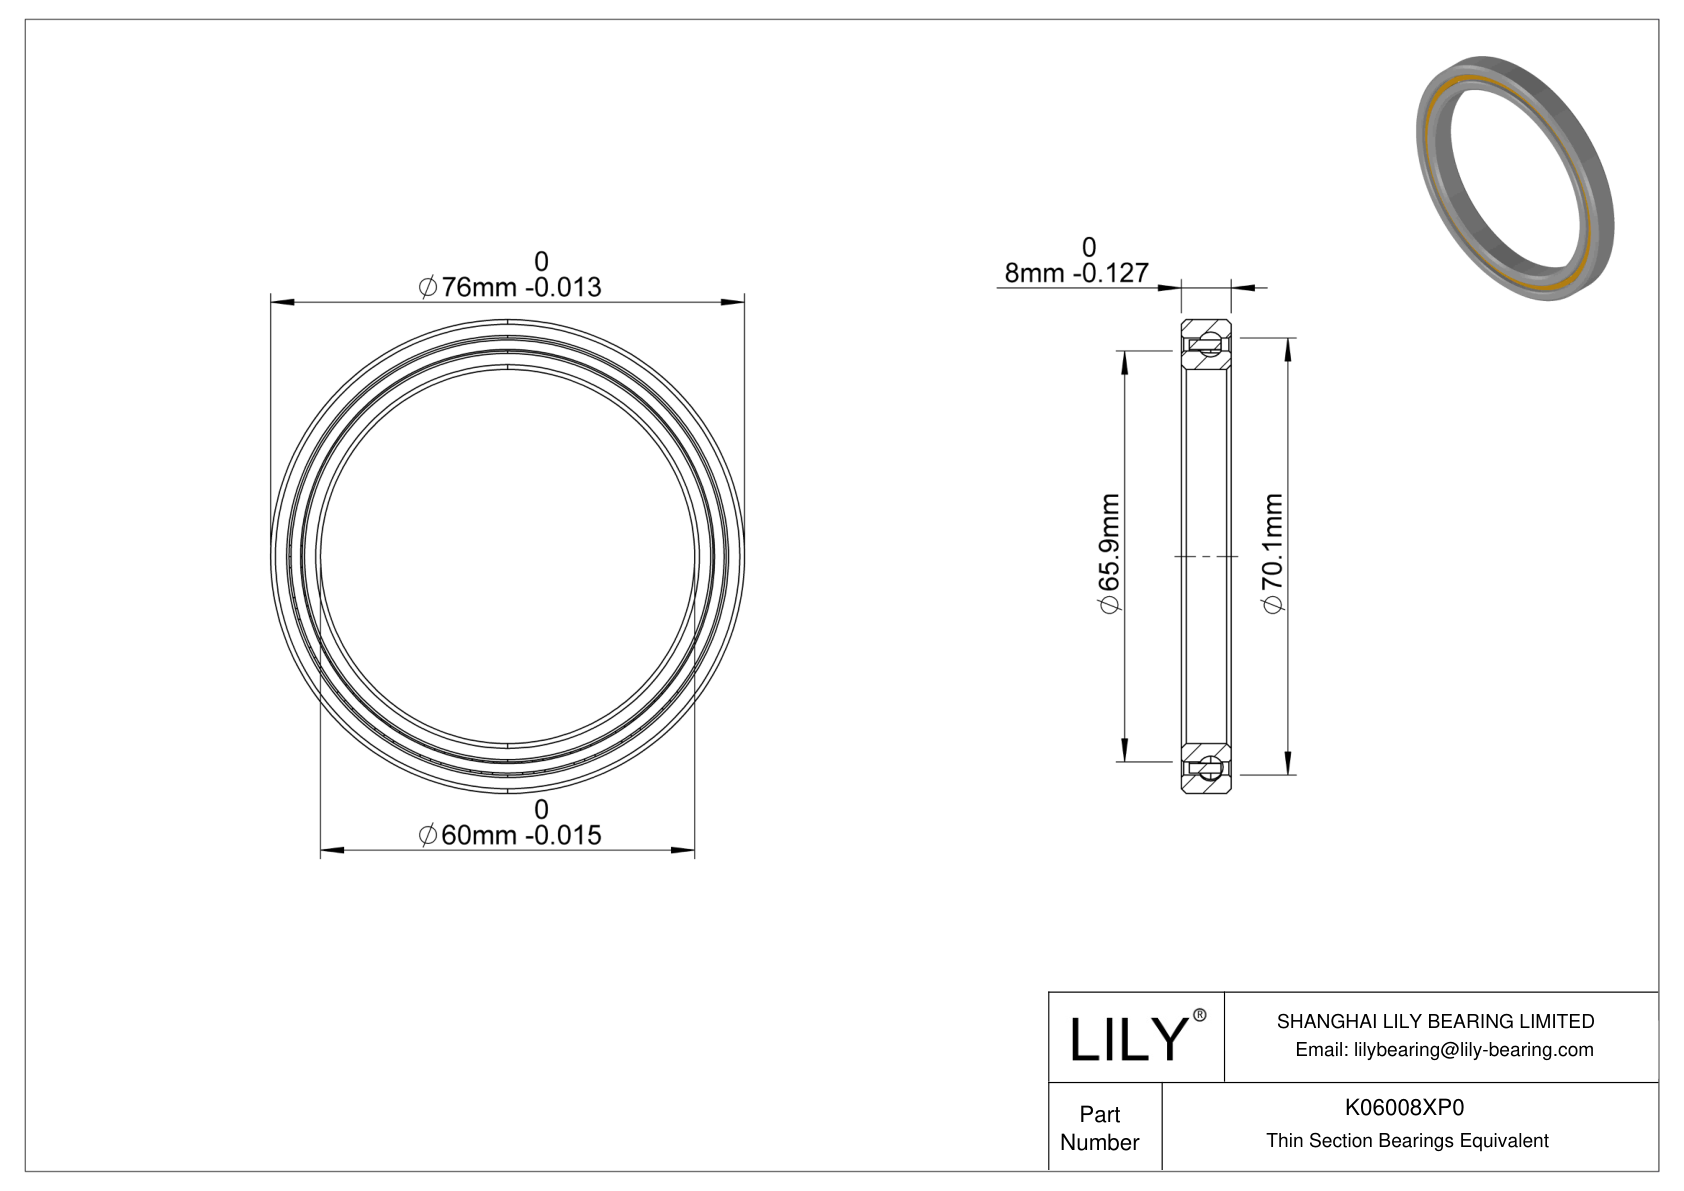 K06008XP0 Constant Section (CS) Bearings cad drawing